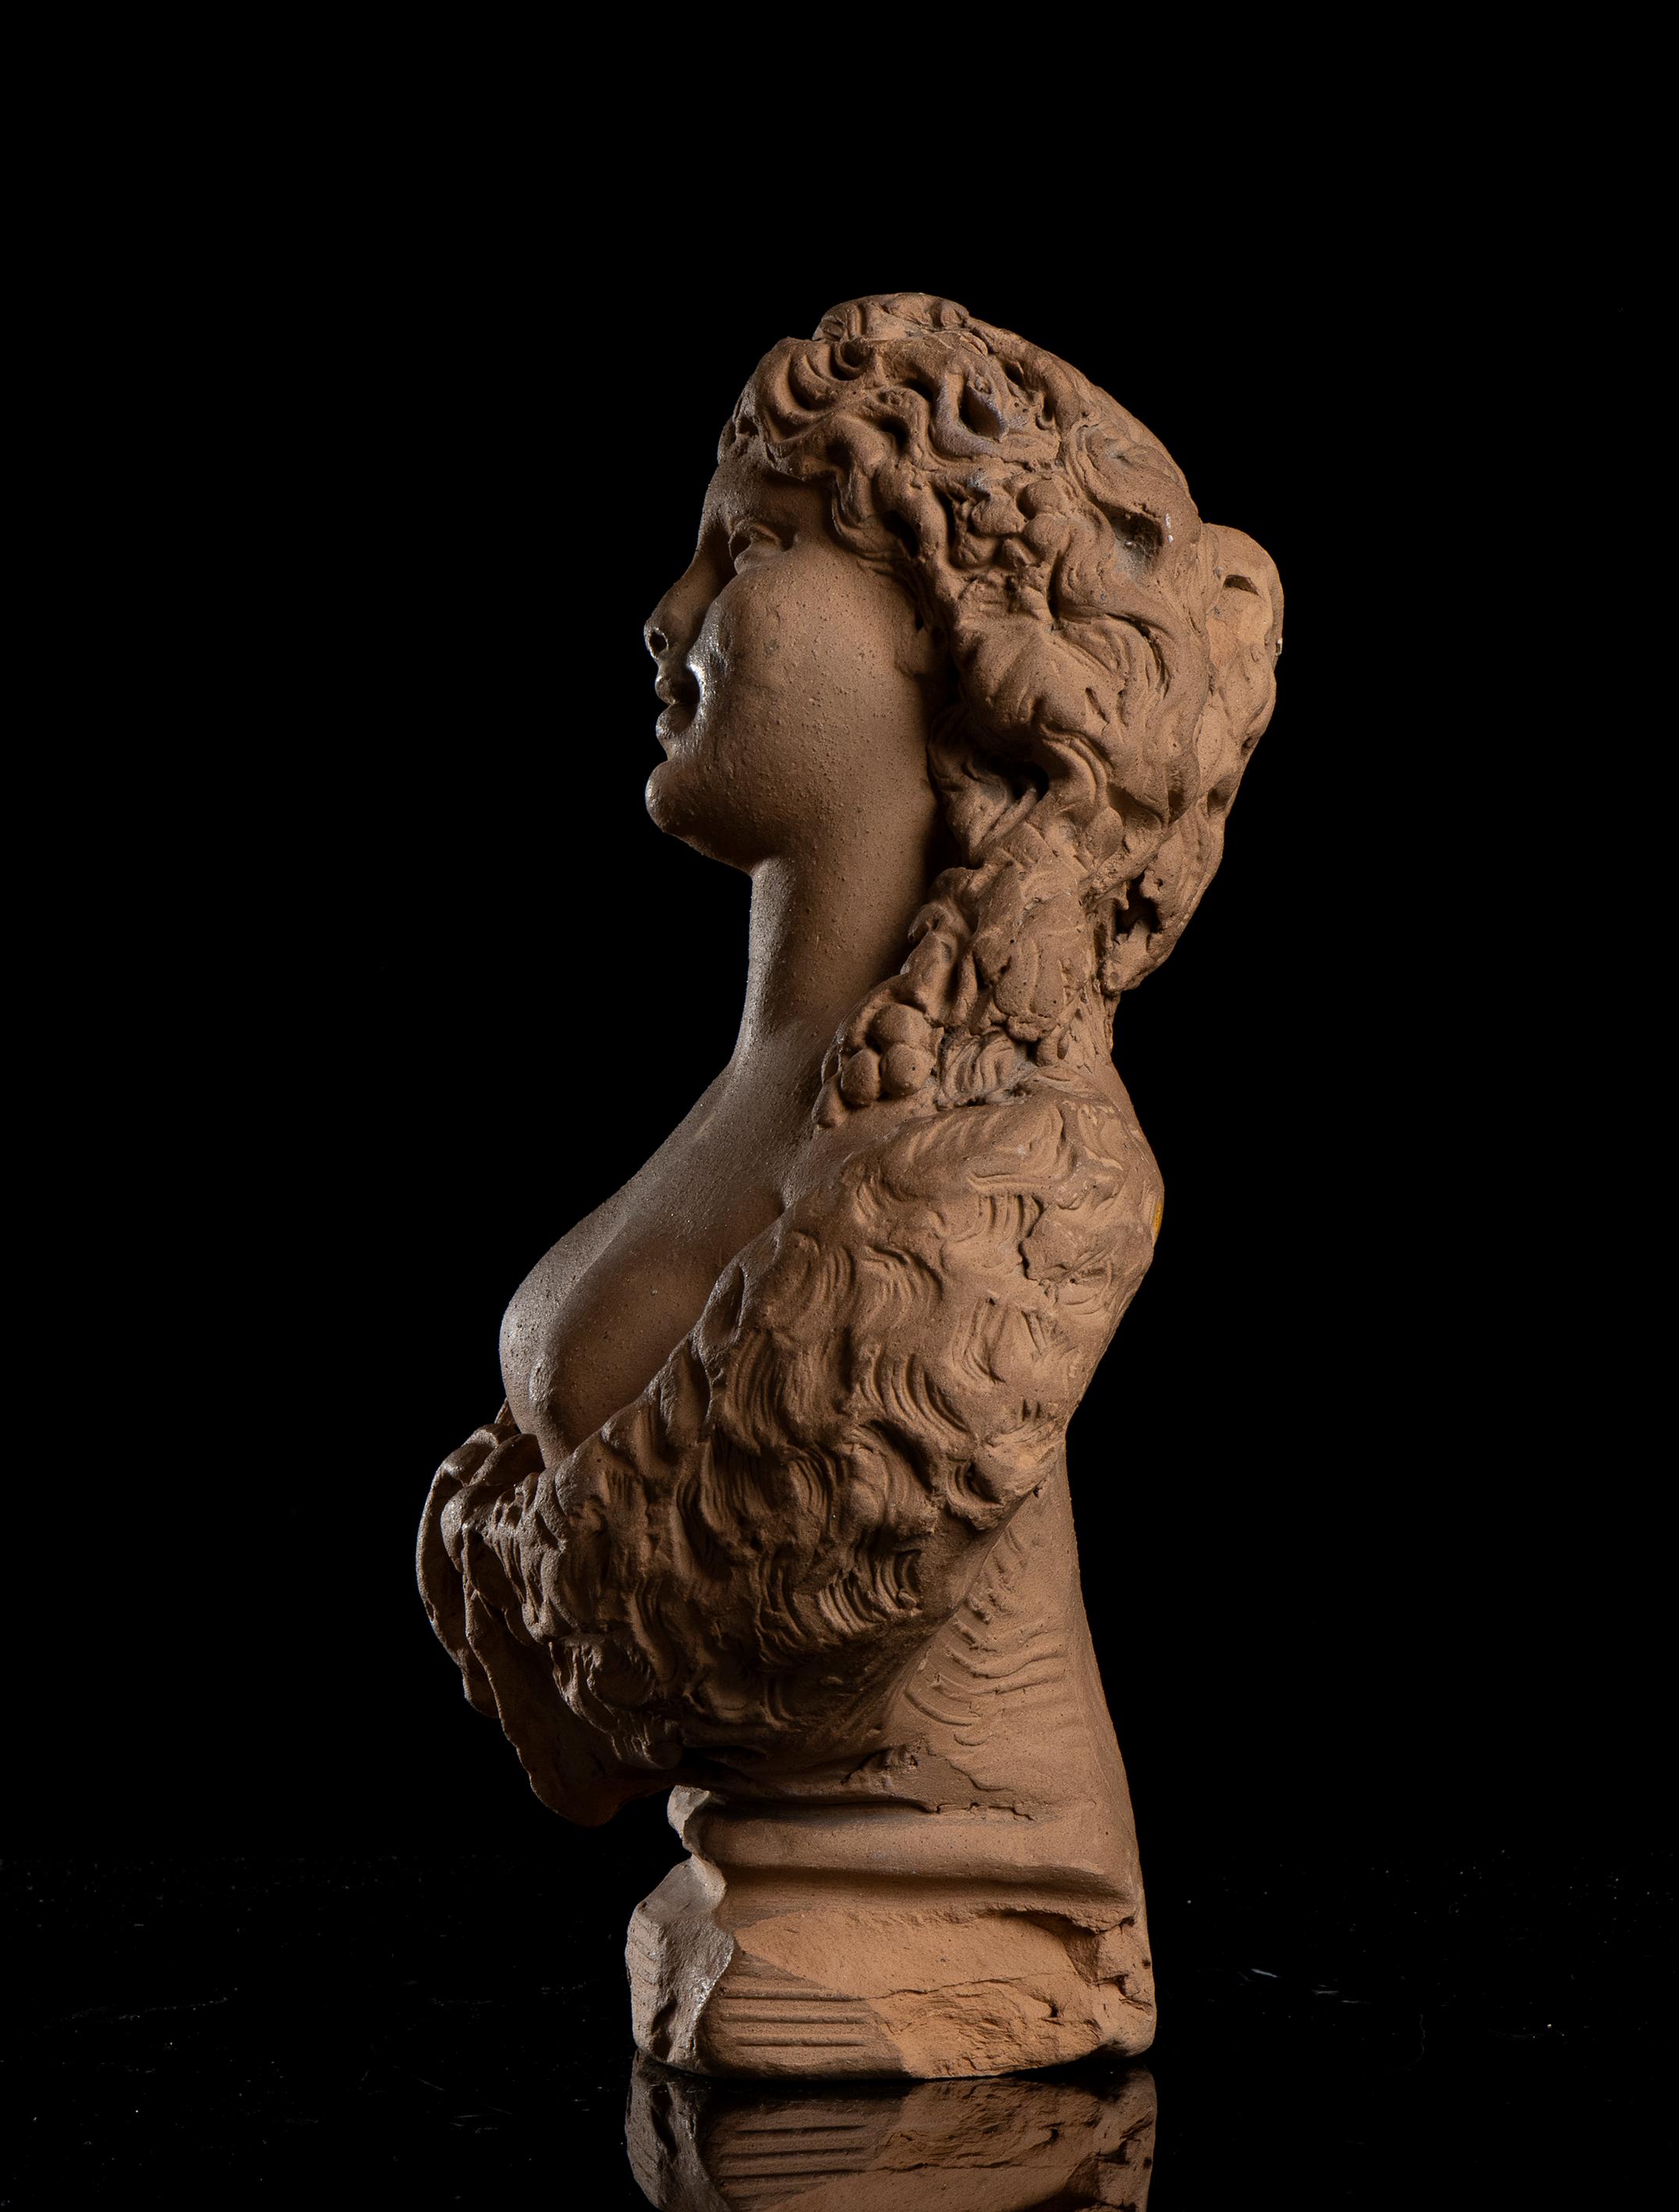 Nymph And Satyr Pair Of Sculptures Busts  By Lanzirotti Signed Terracotta 19th  For Sale 12